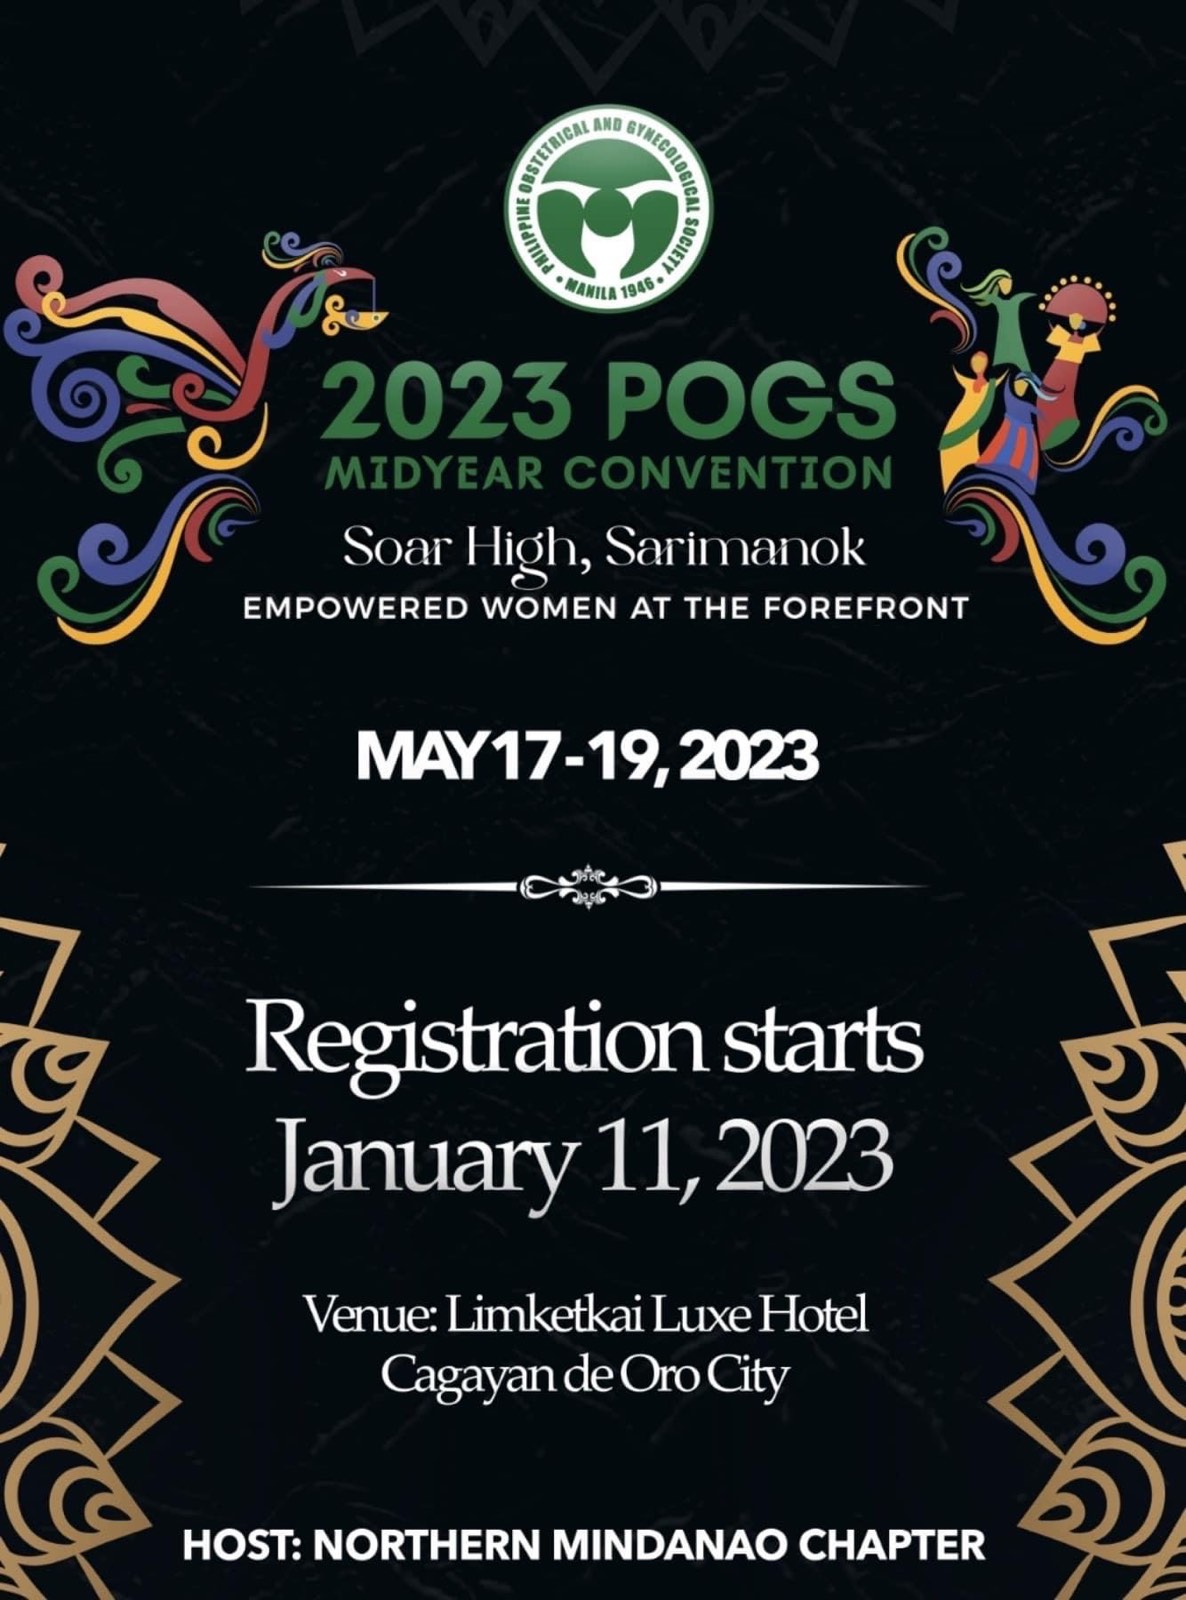 POGS Midyear Convention 2023